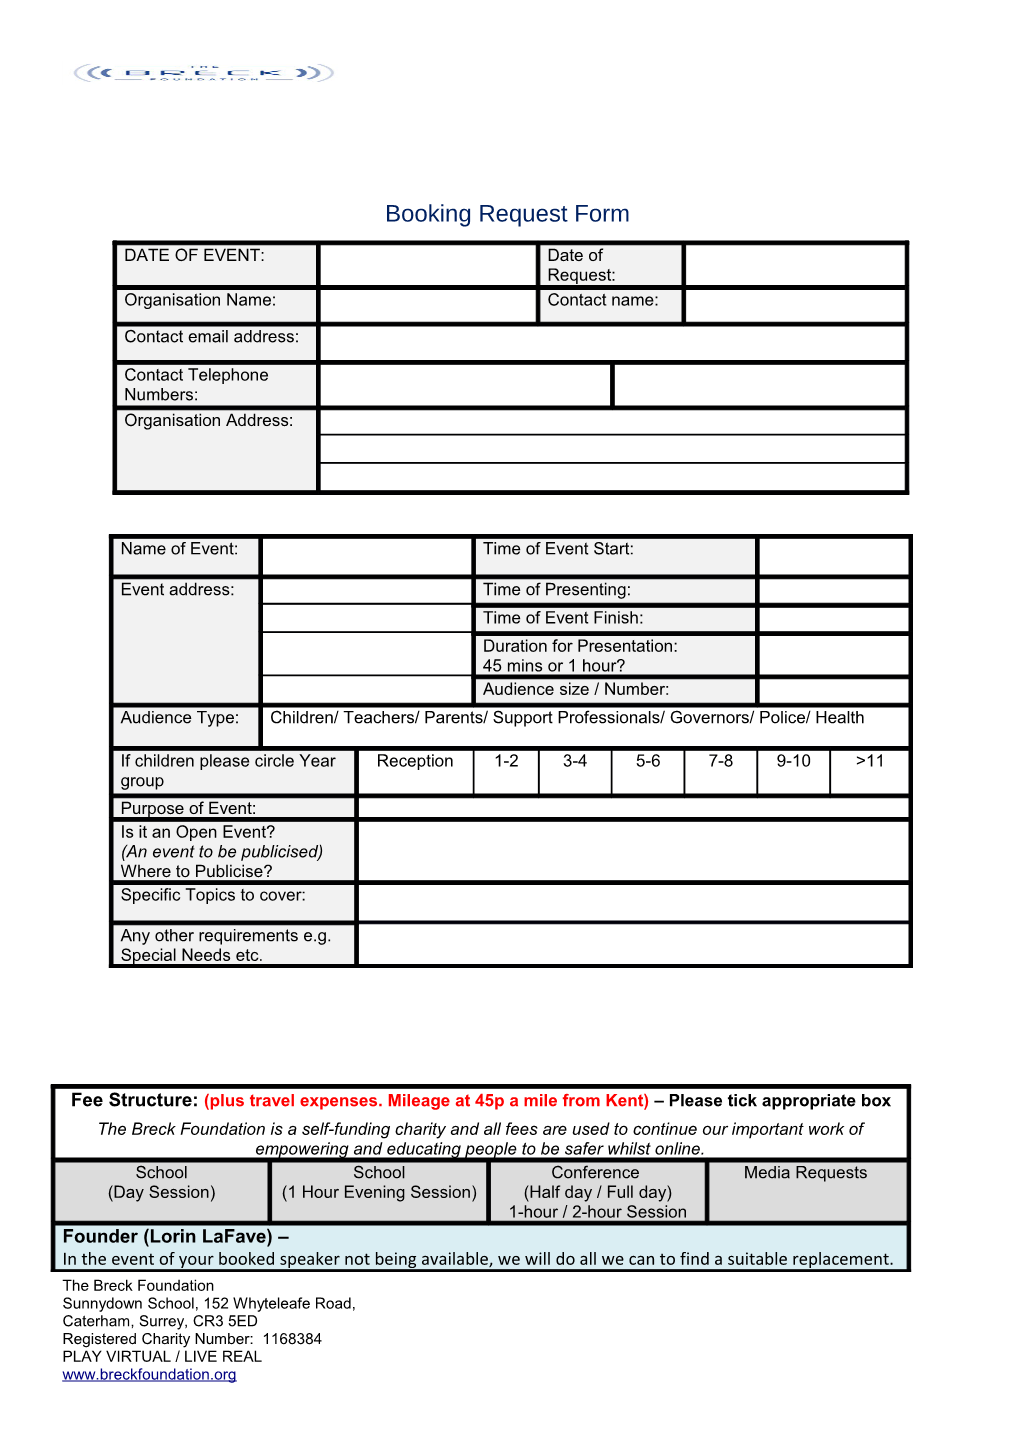 Booking Request Form s1